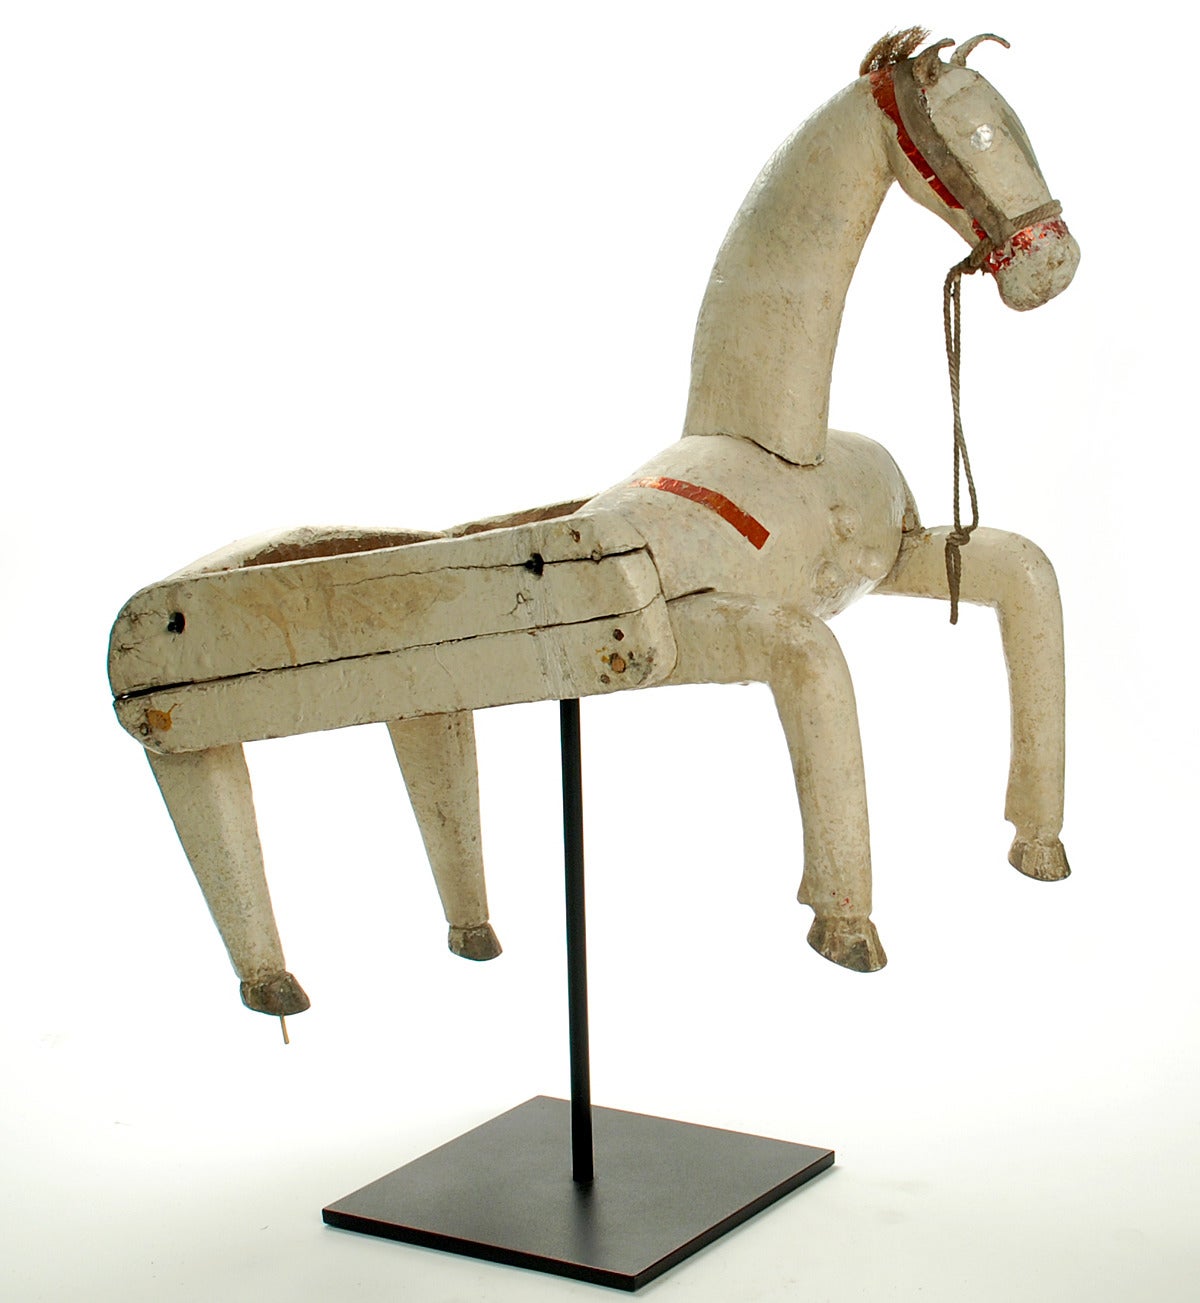 A great vintage Mexican 'Santiaguito' body mask with silver and red decals, horse hair mane and the original polychrome painted surface. Excellent wear and patina. Displayed on a high quality custom made stand.<br />
<br />
Dimensions: 25 inches